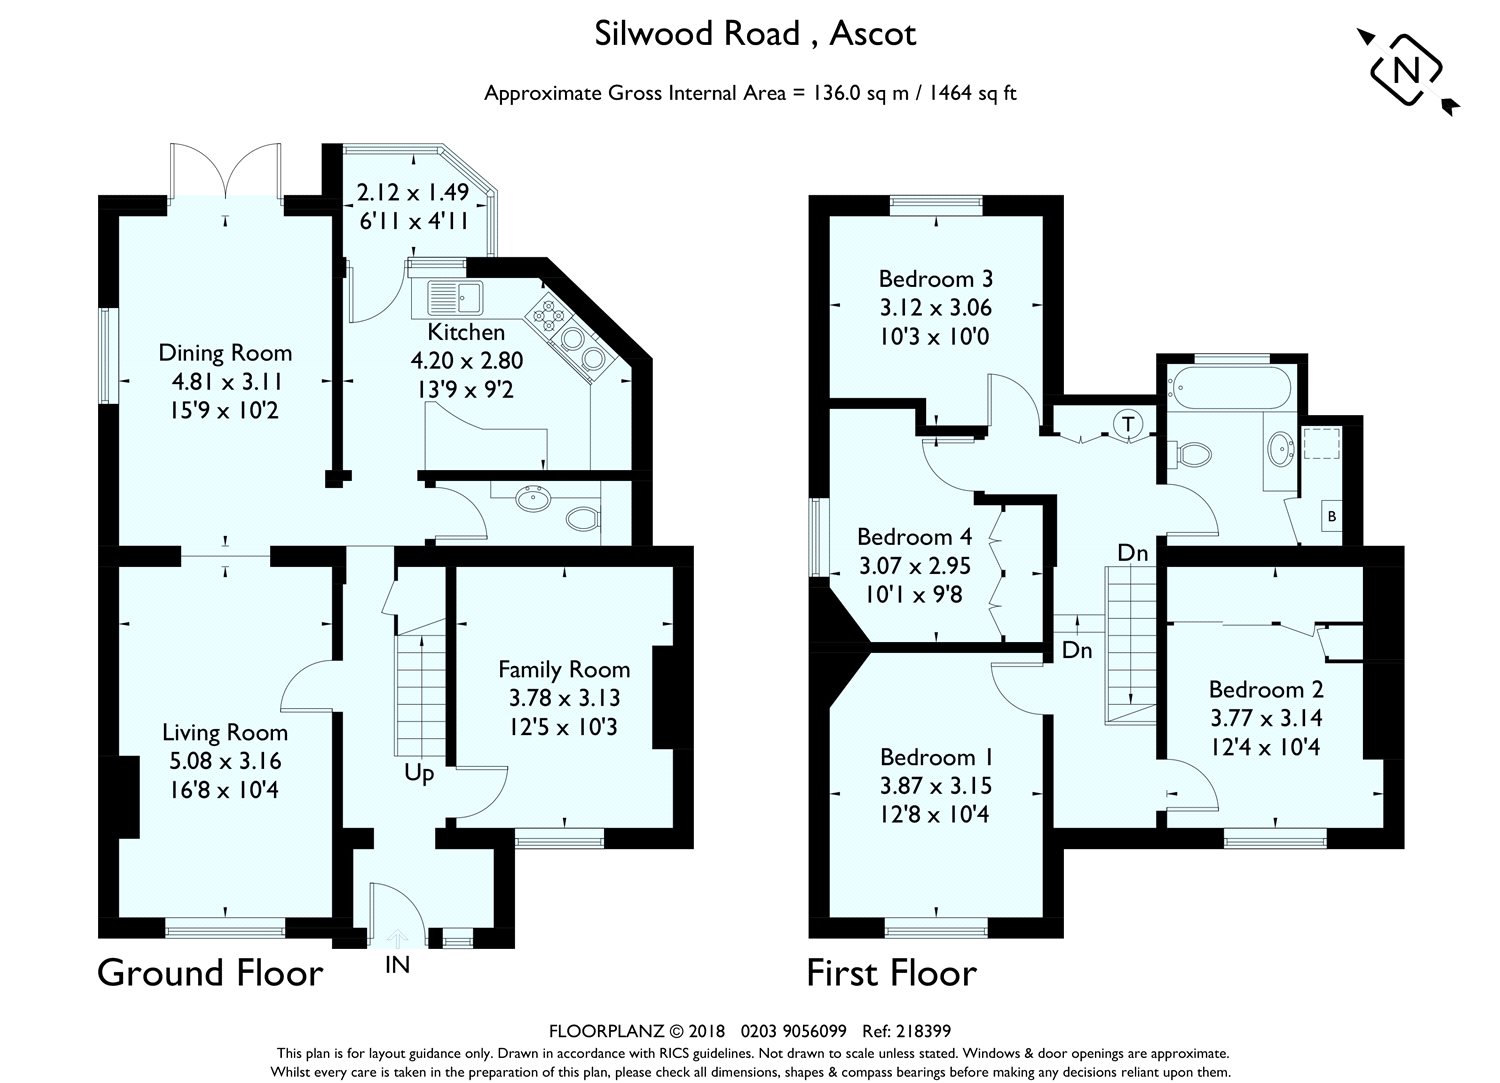 4 Bedrooms Semi-detached house for sale in Silwood Road, Sunningdale, Ascot, Berkshire SL5